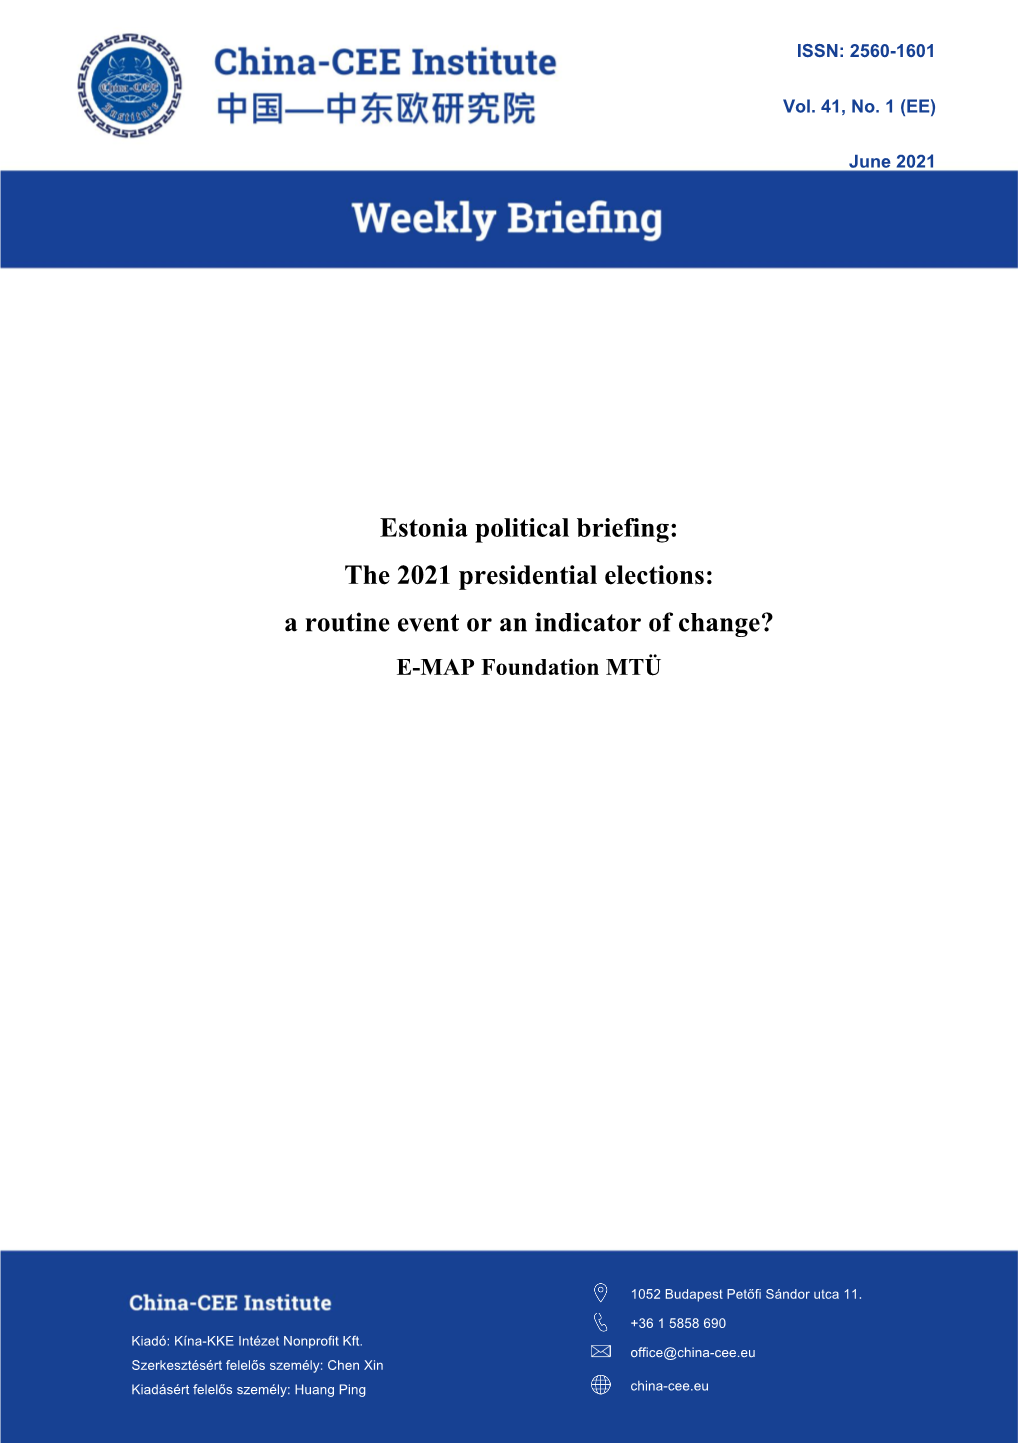 Estonia Political Briefing: the 2021 Presidential Elections: a Routine Event Or an Indicator of Change? E-MAP Foundation MTÜ